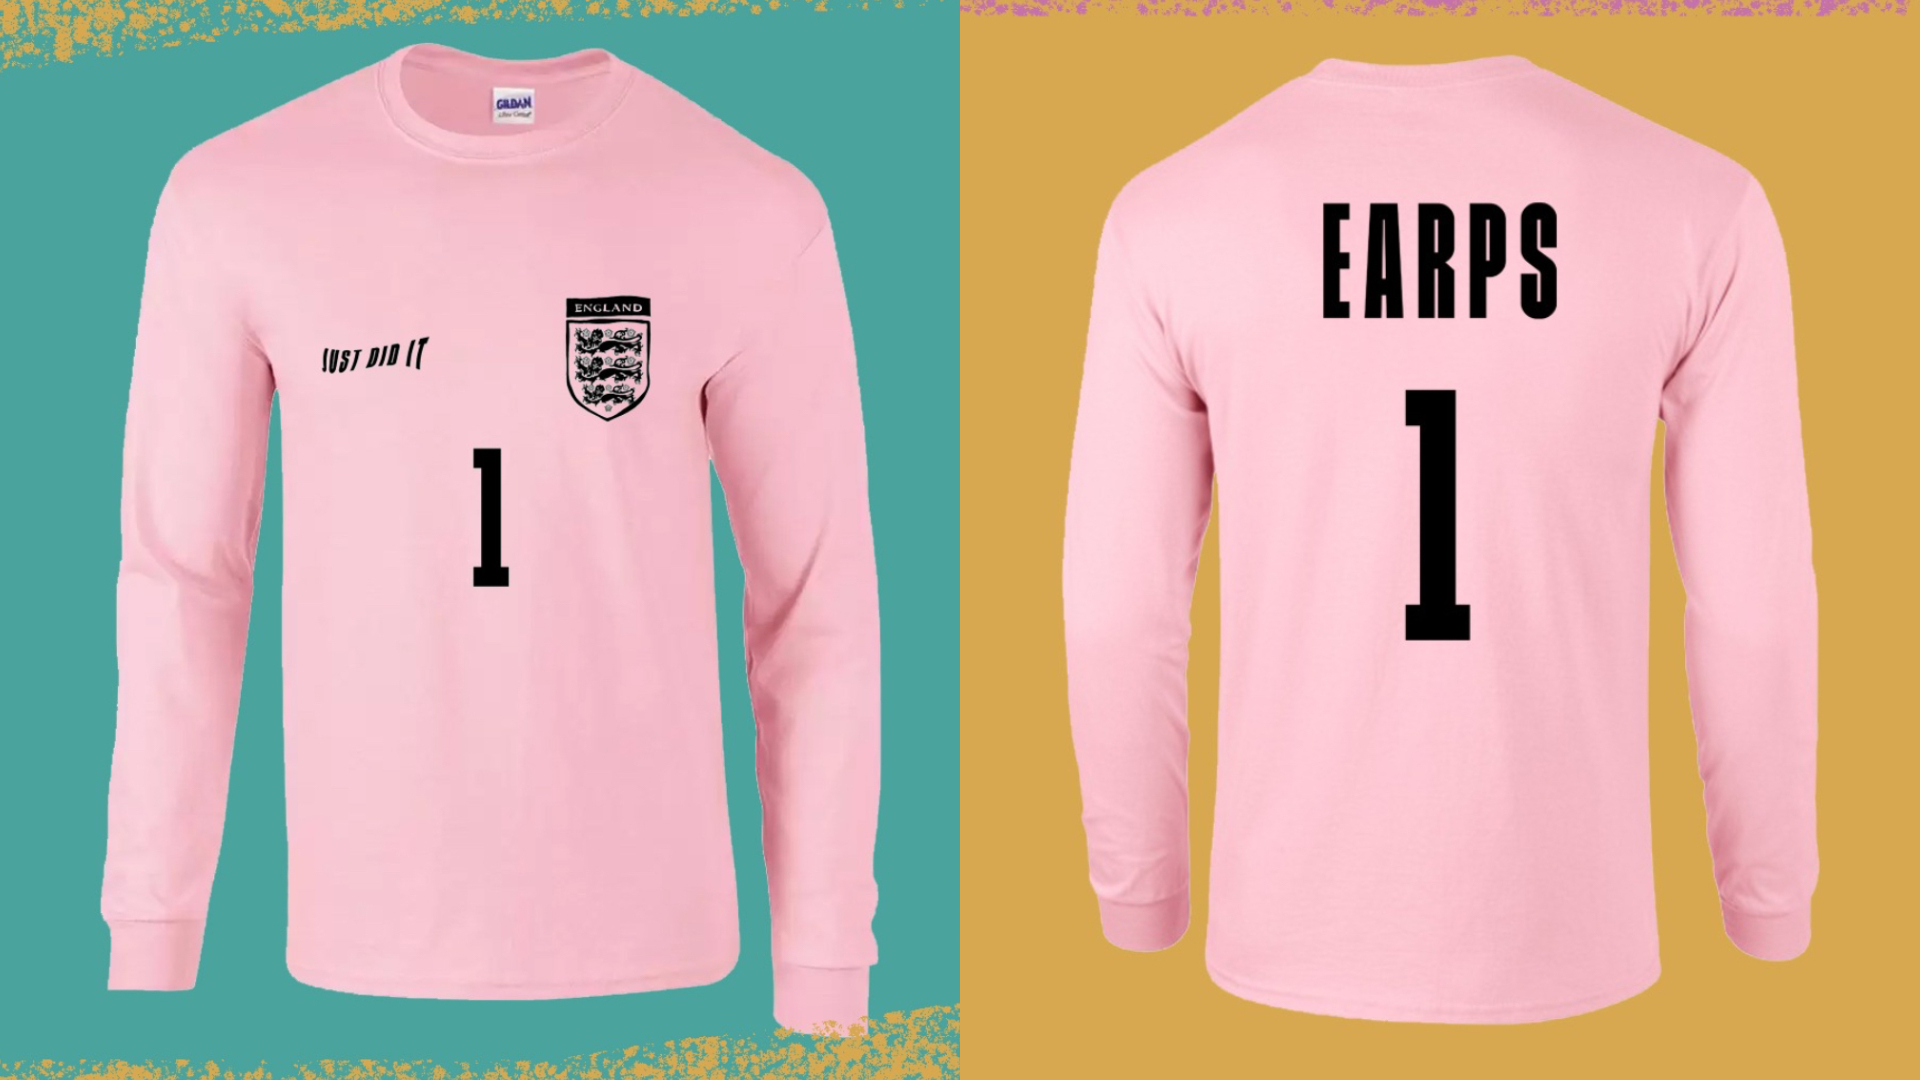 The front and back Alcopop's replica of Mary Earps shirt